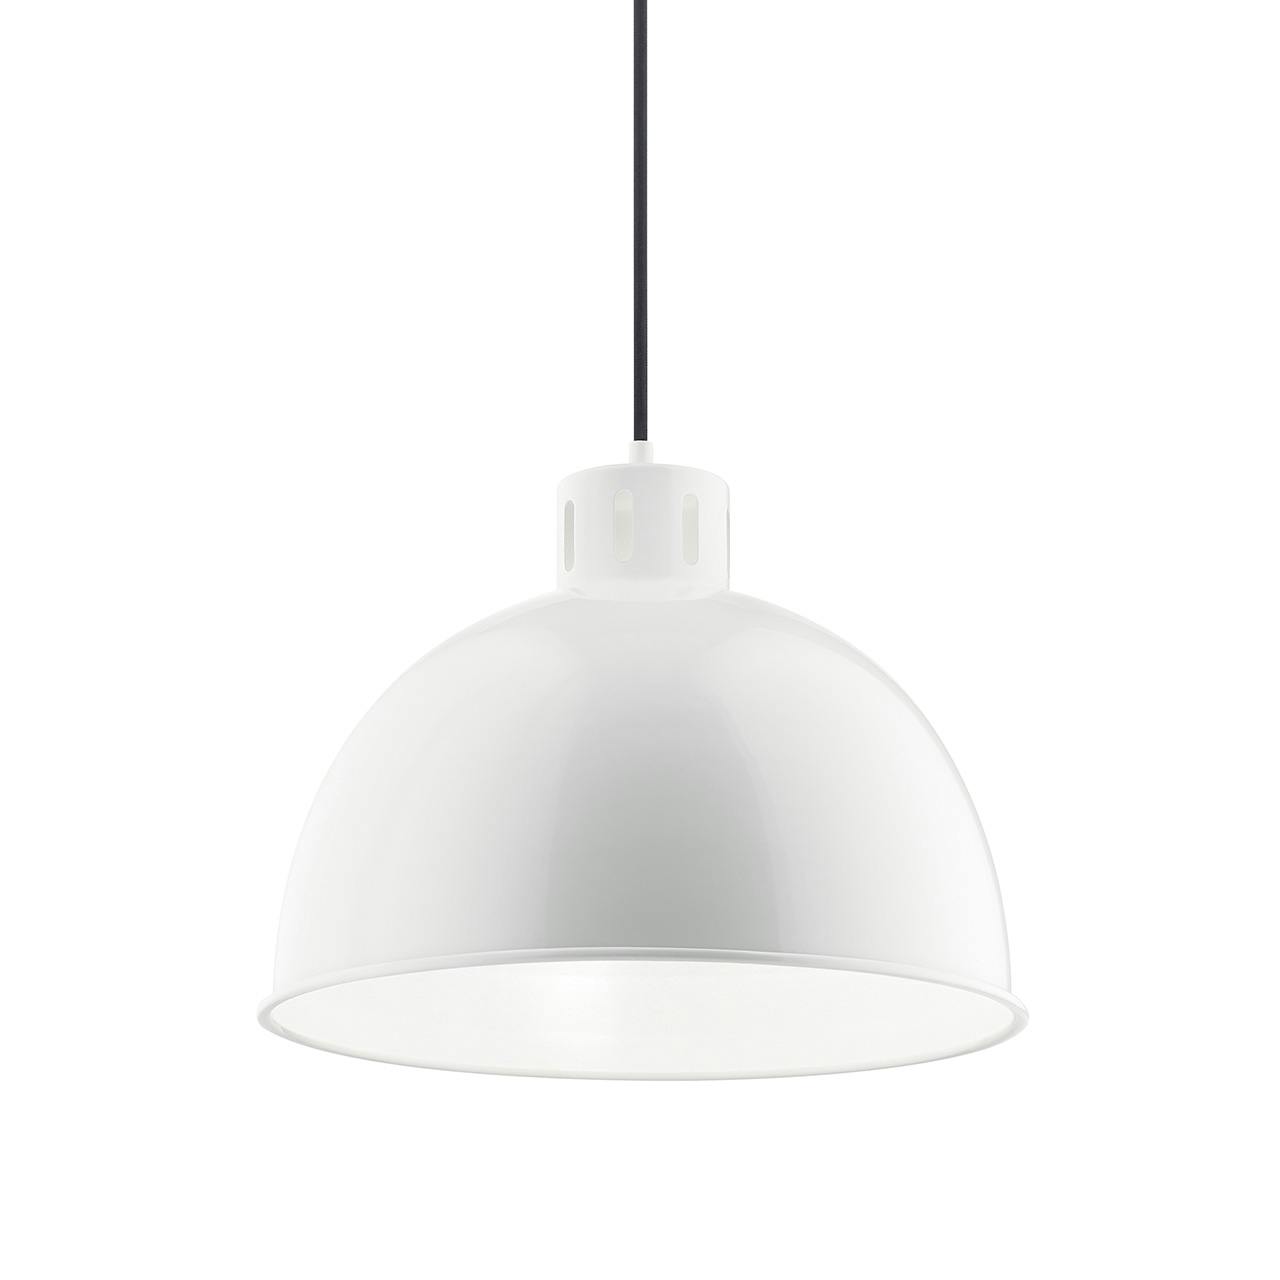 Zailey™ 15.75" 1 Light Pendant in White without the canopy on a white background